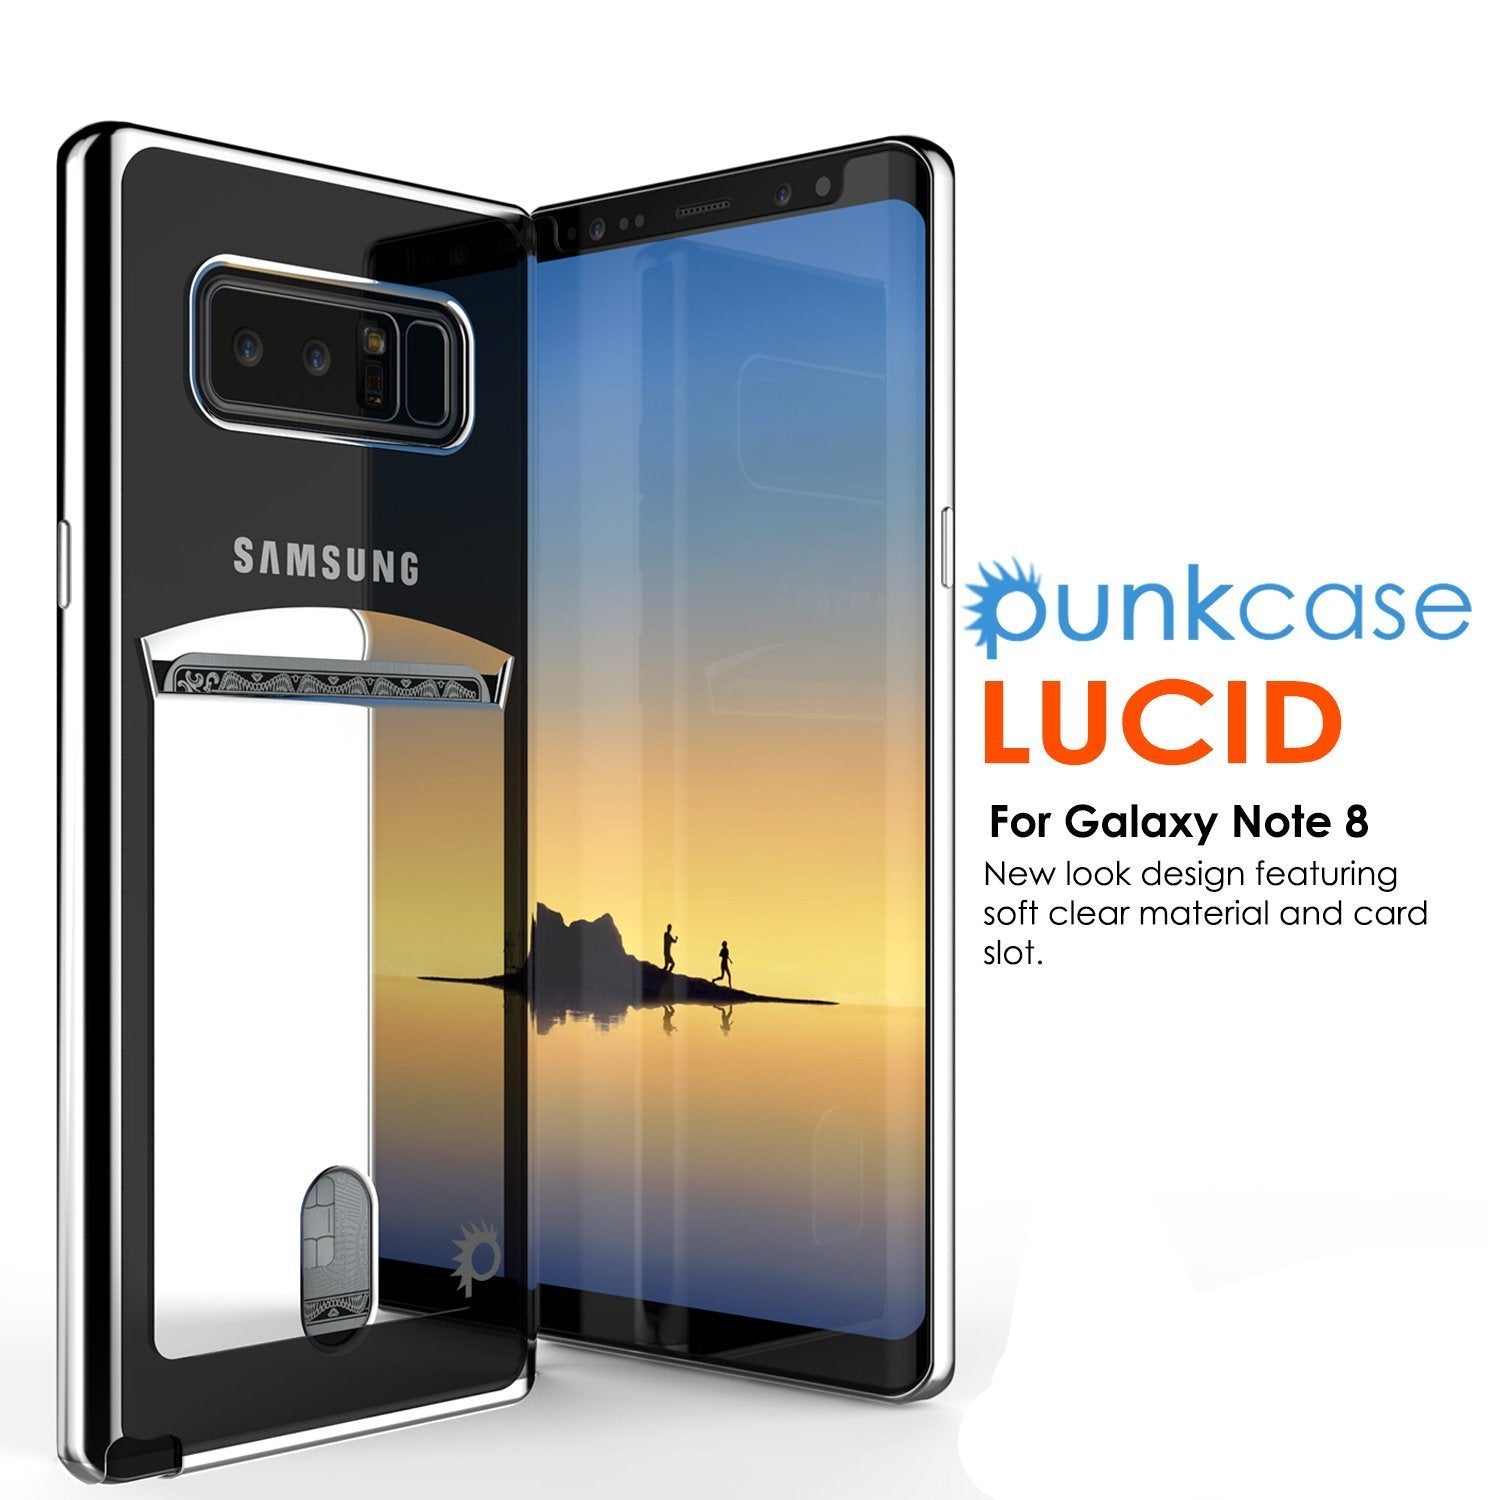 Galaxy Note 8 Case, Punkcase LUCID Gold Series Protective Case